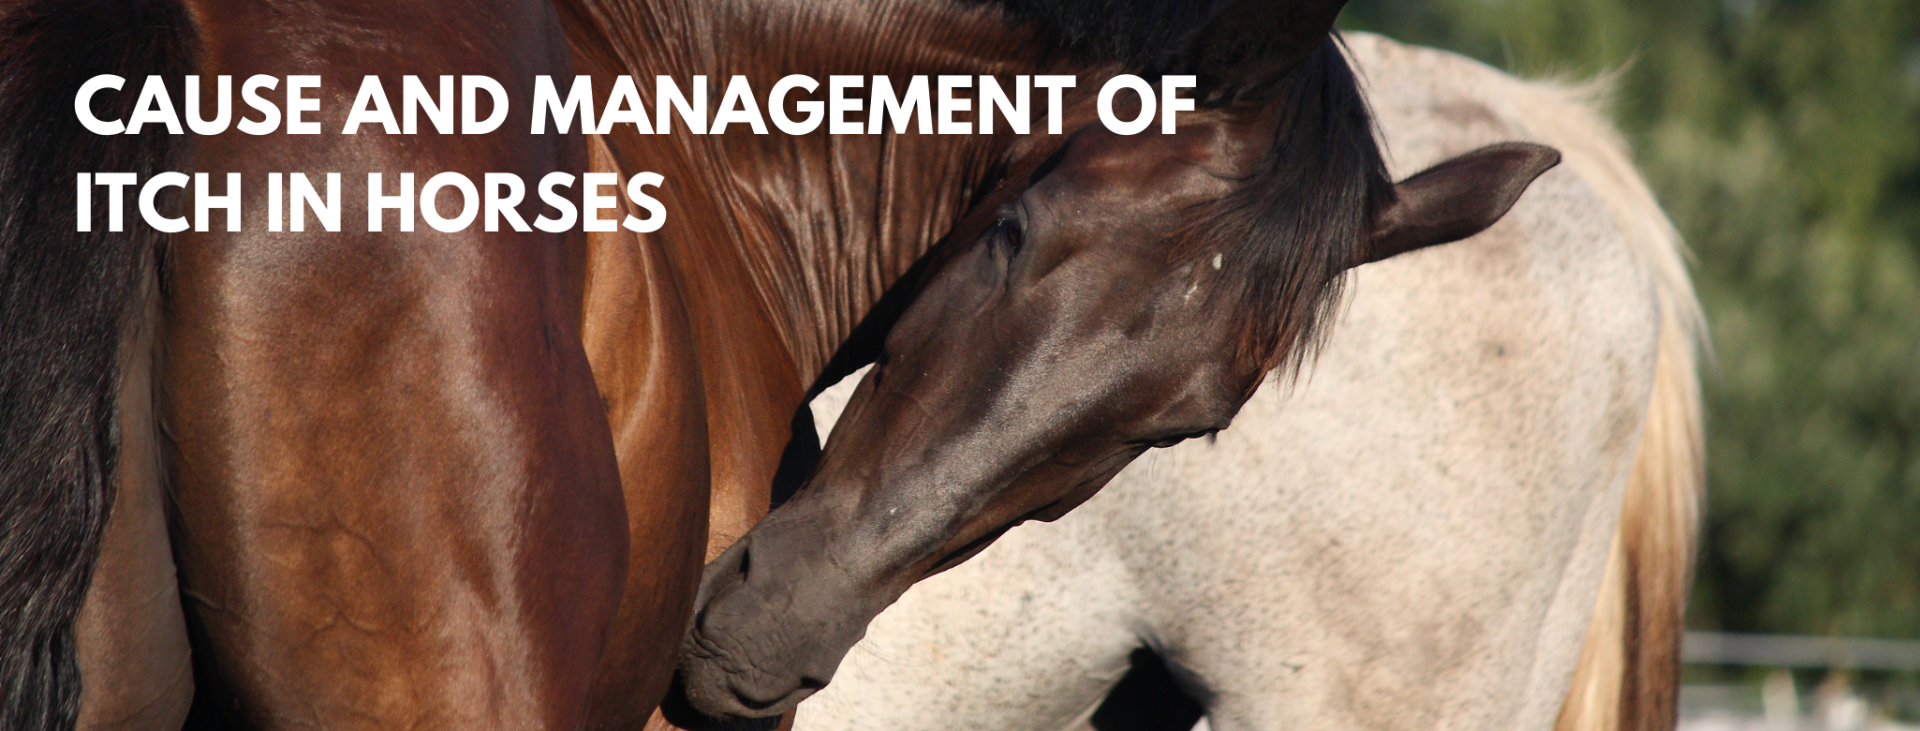 Cause and management of itch in horses